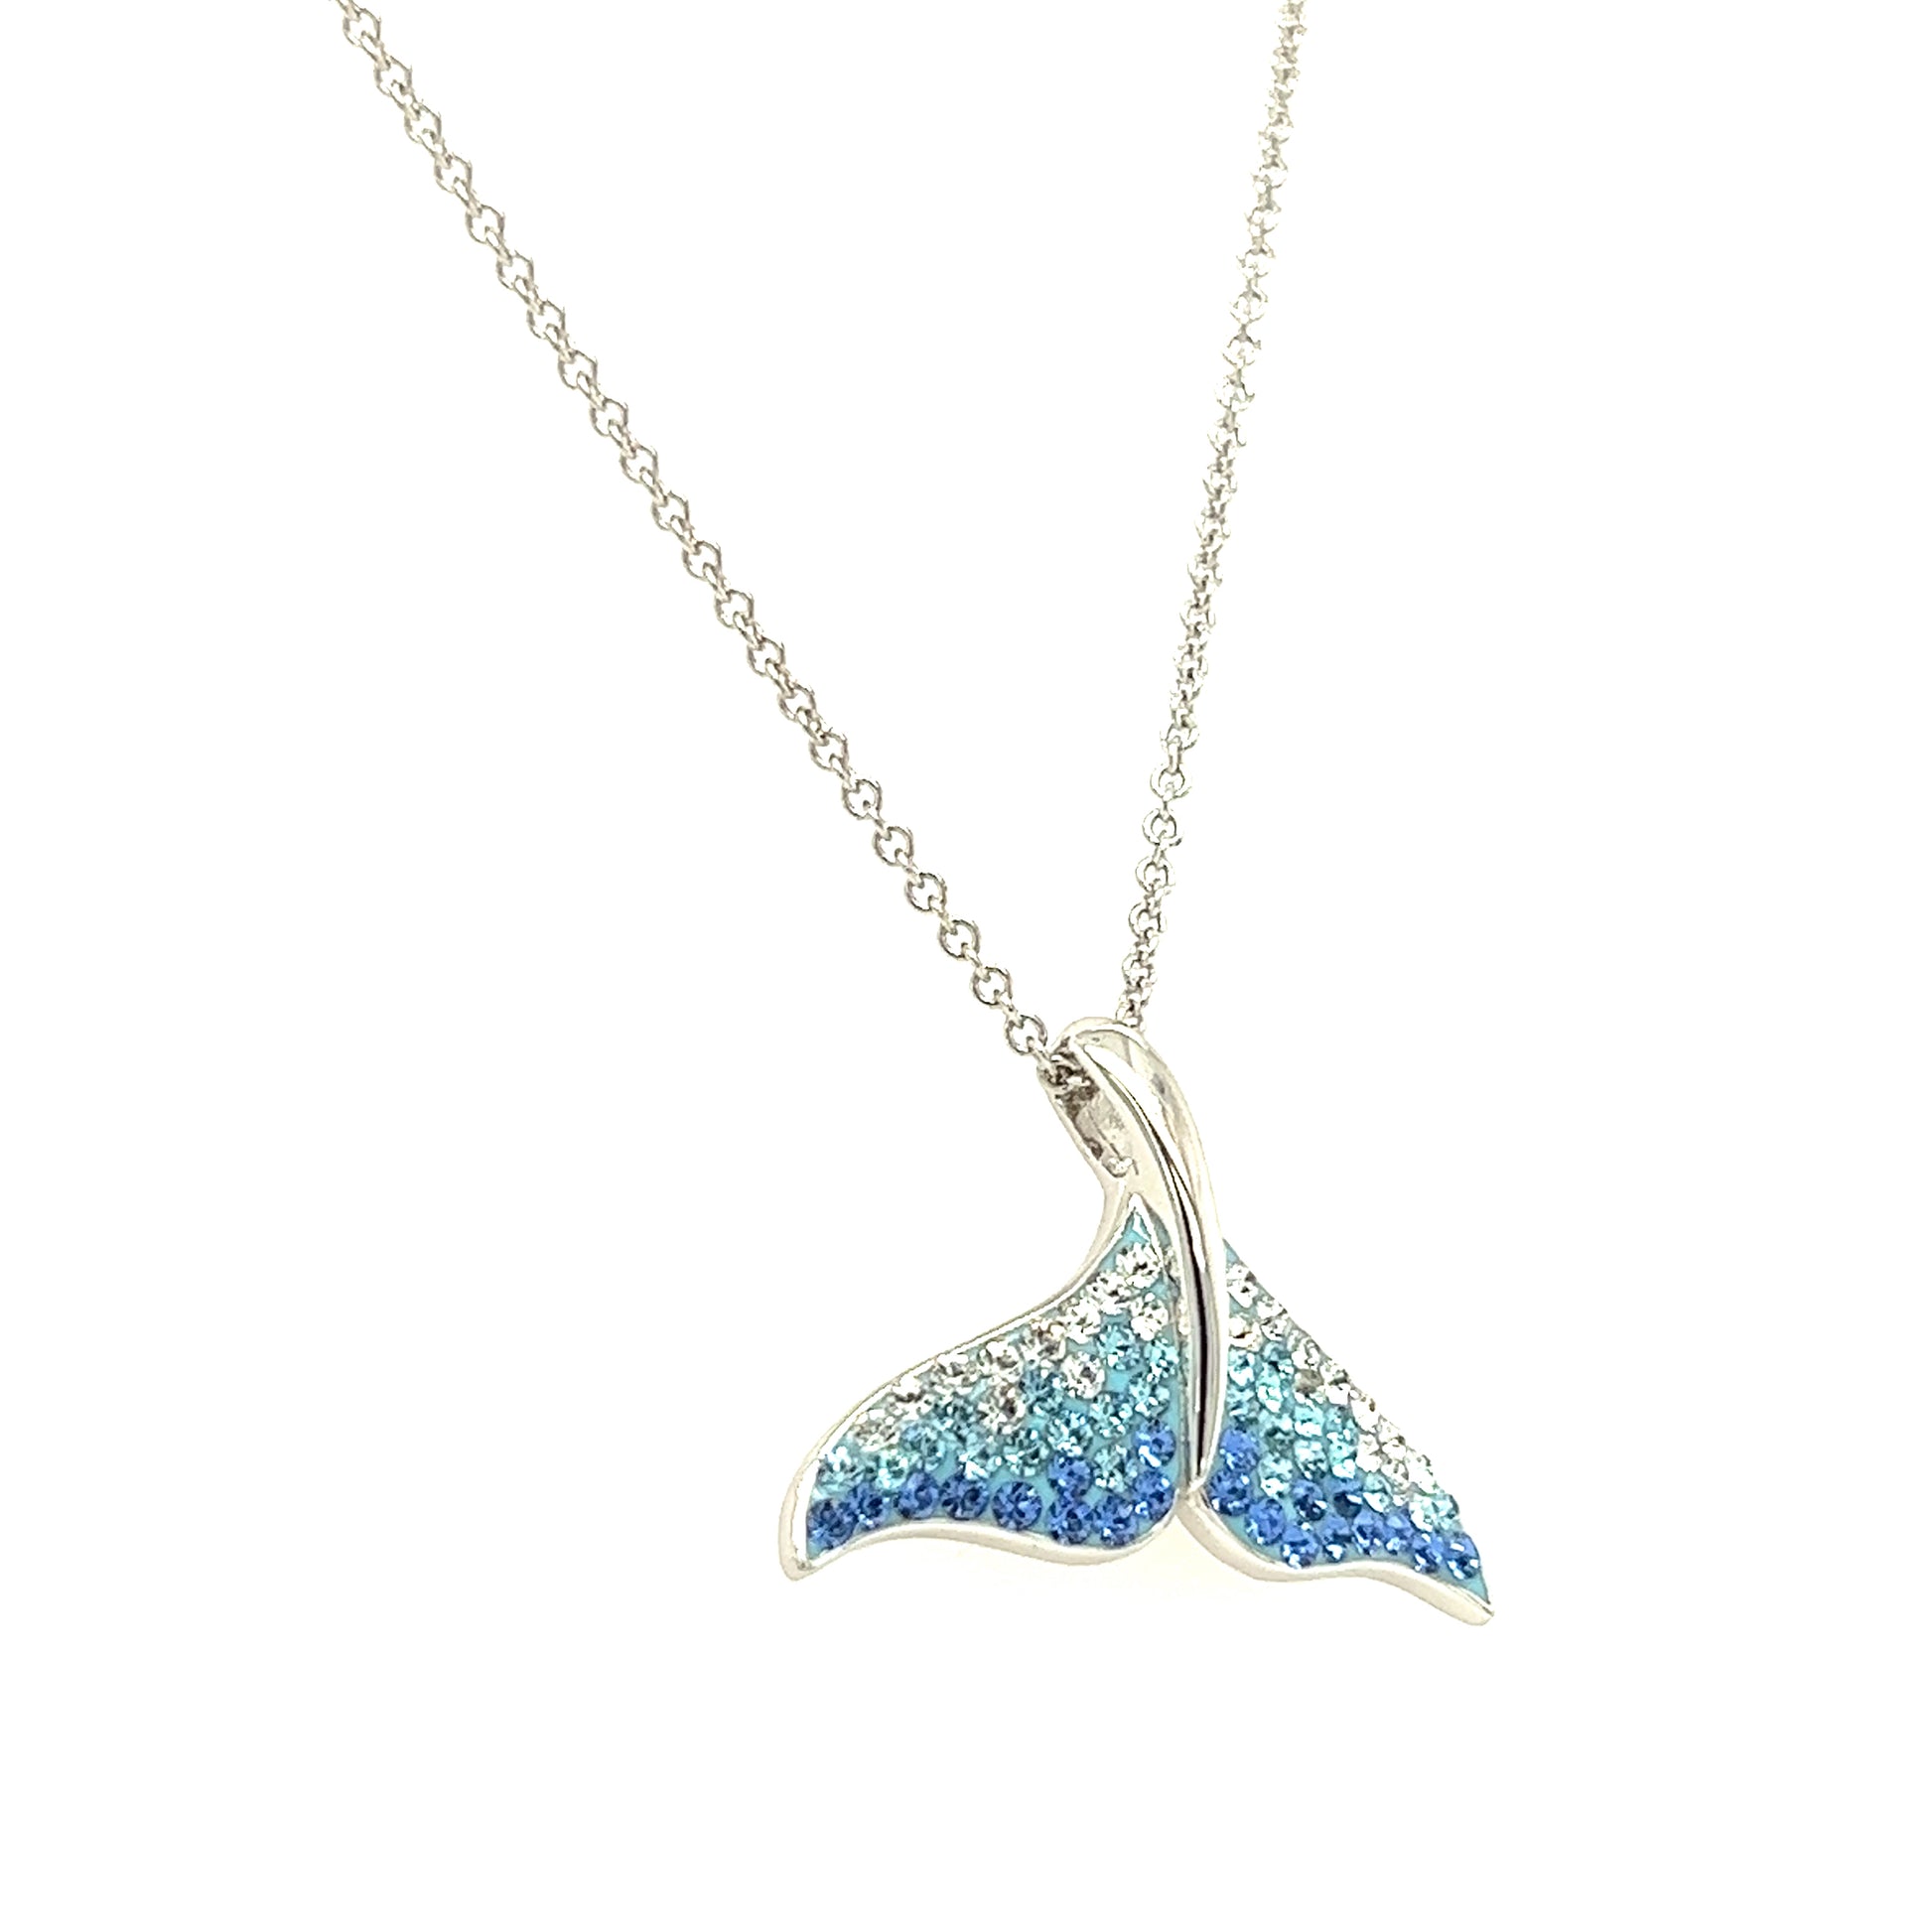 Whale Tail Necklace with White, Aqua and Blue Crystals in Sterling Silver Left Side View